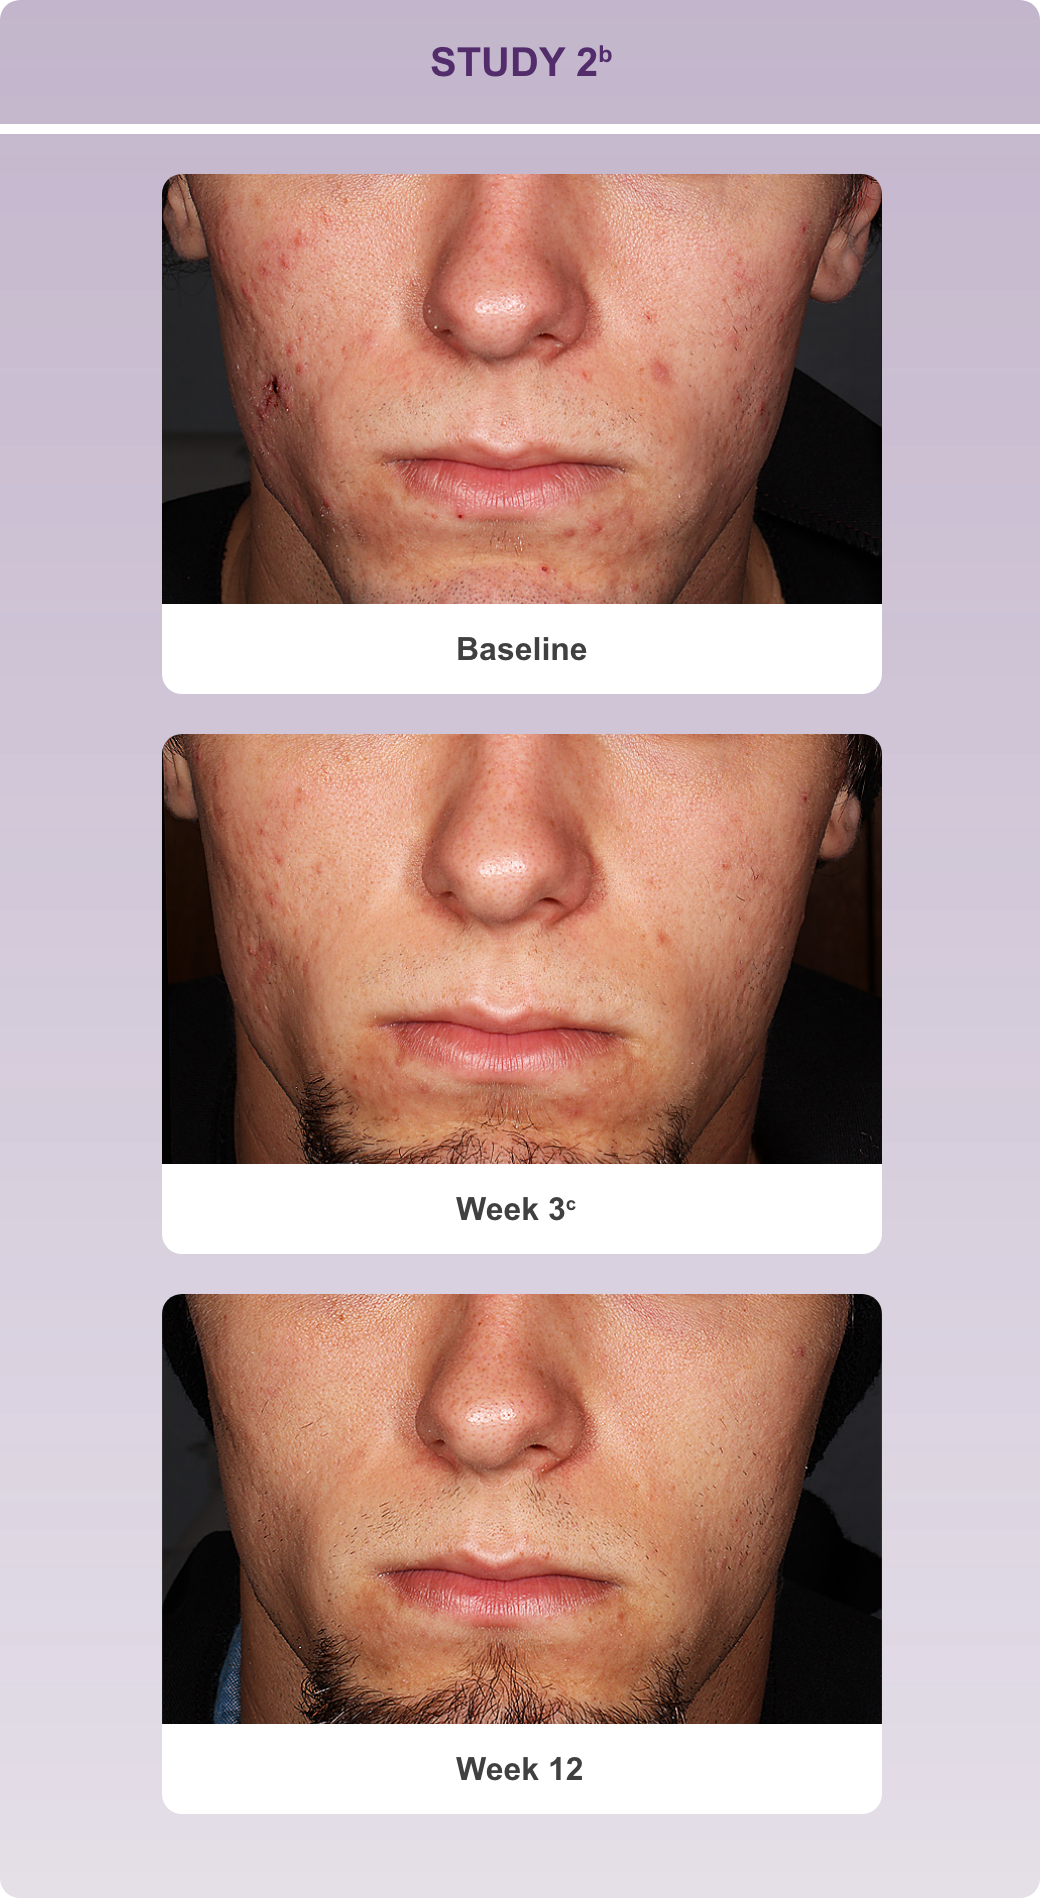 Series of progressive reduction in lesions on a subject's face at baseline, week 3 and week 12 in study 2